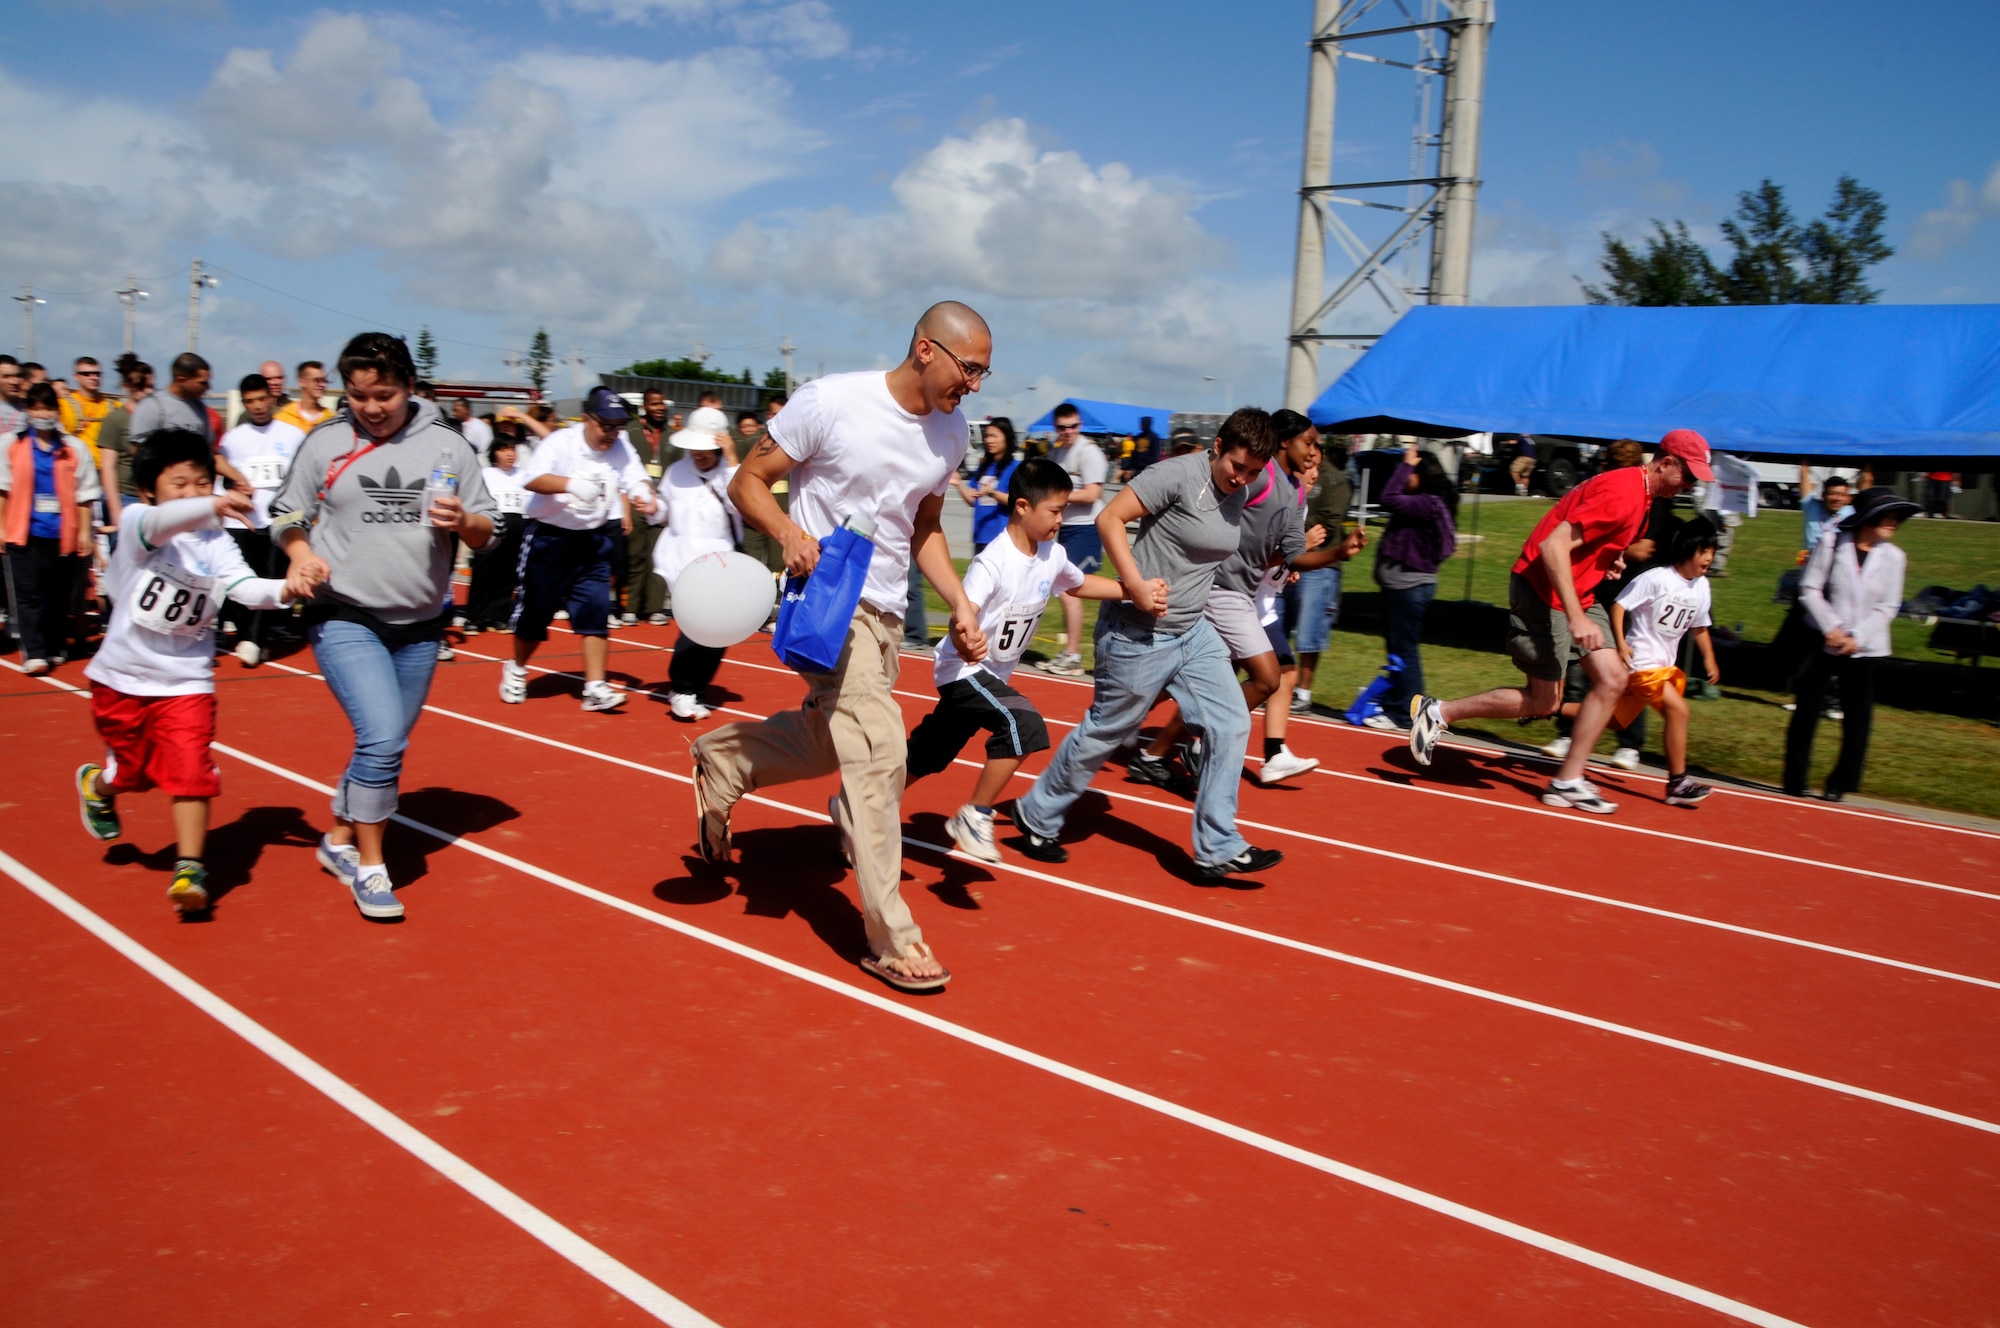 Special Olympics athletes compete in the 30 meter dash during the Kadena Special Olympics Nov. 14, 2009, Kadena Air Base, Japan. Kadena hosted the 10th Annual Special Olympic Games and Art Festival for special needs Okinawan and American adult and child athletes.
(U.S. Air Force photo/Tech. Sgt. Angelique Perez) 